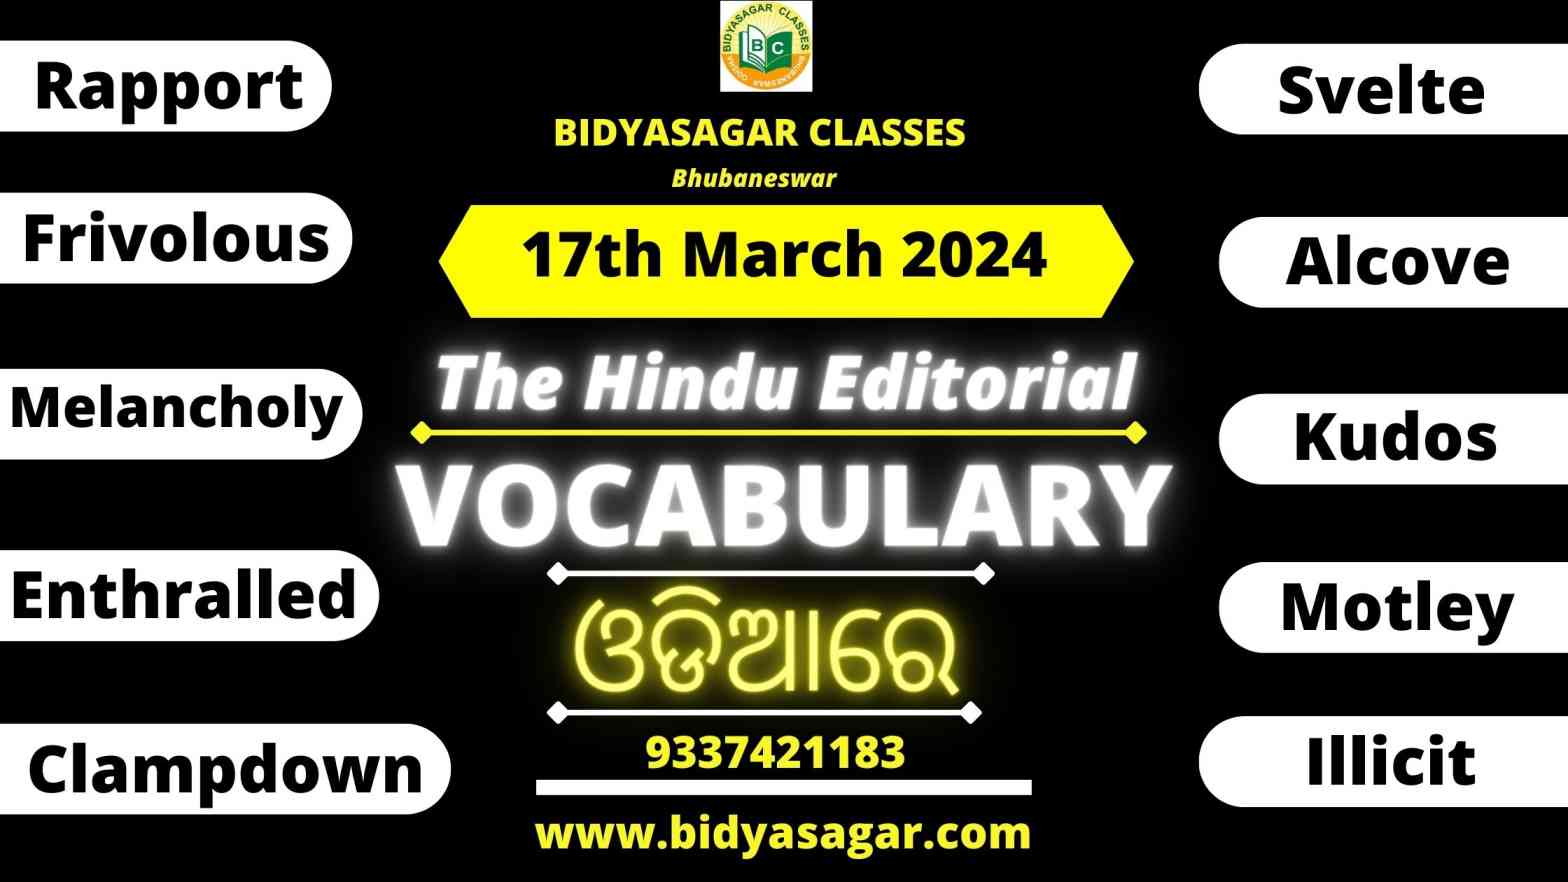 The Hindu Editorial Vocabulary of 17th March 2024